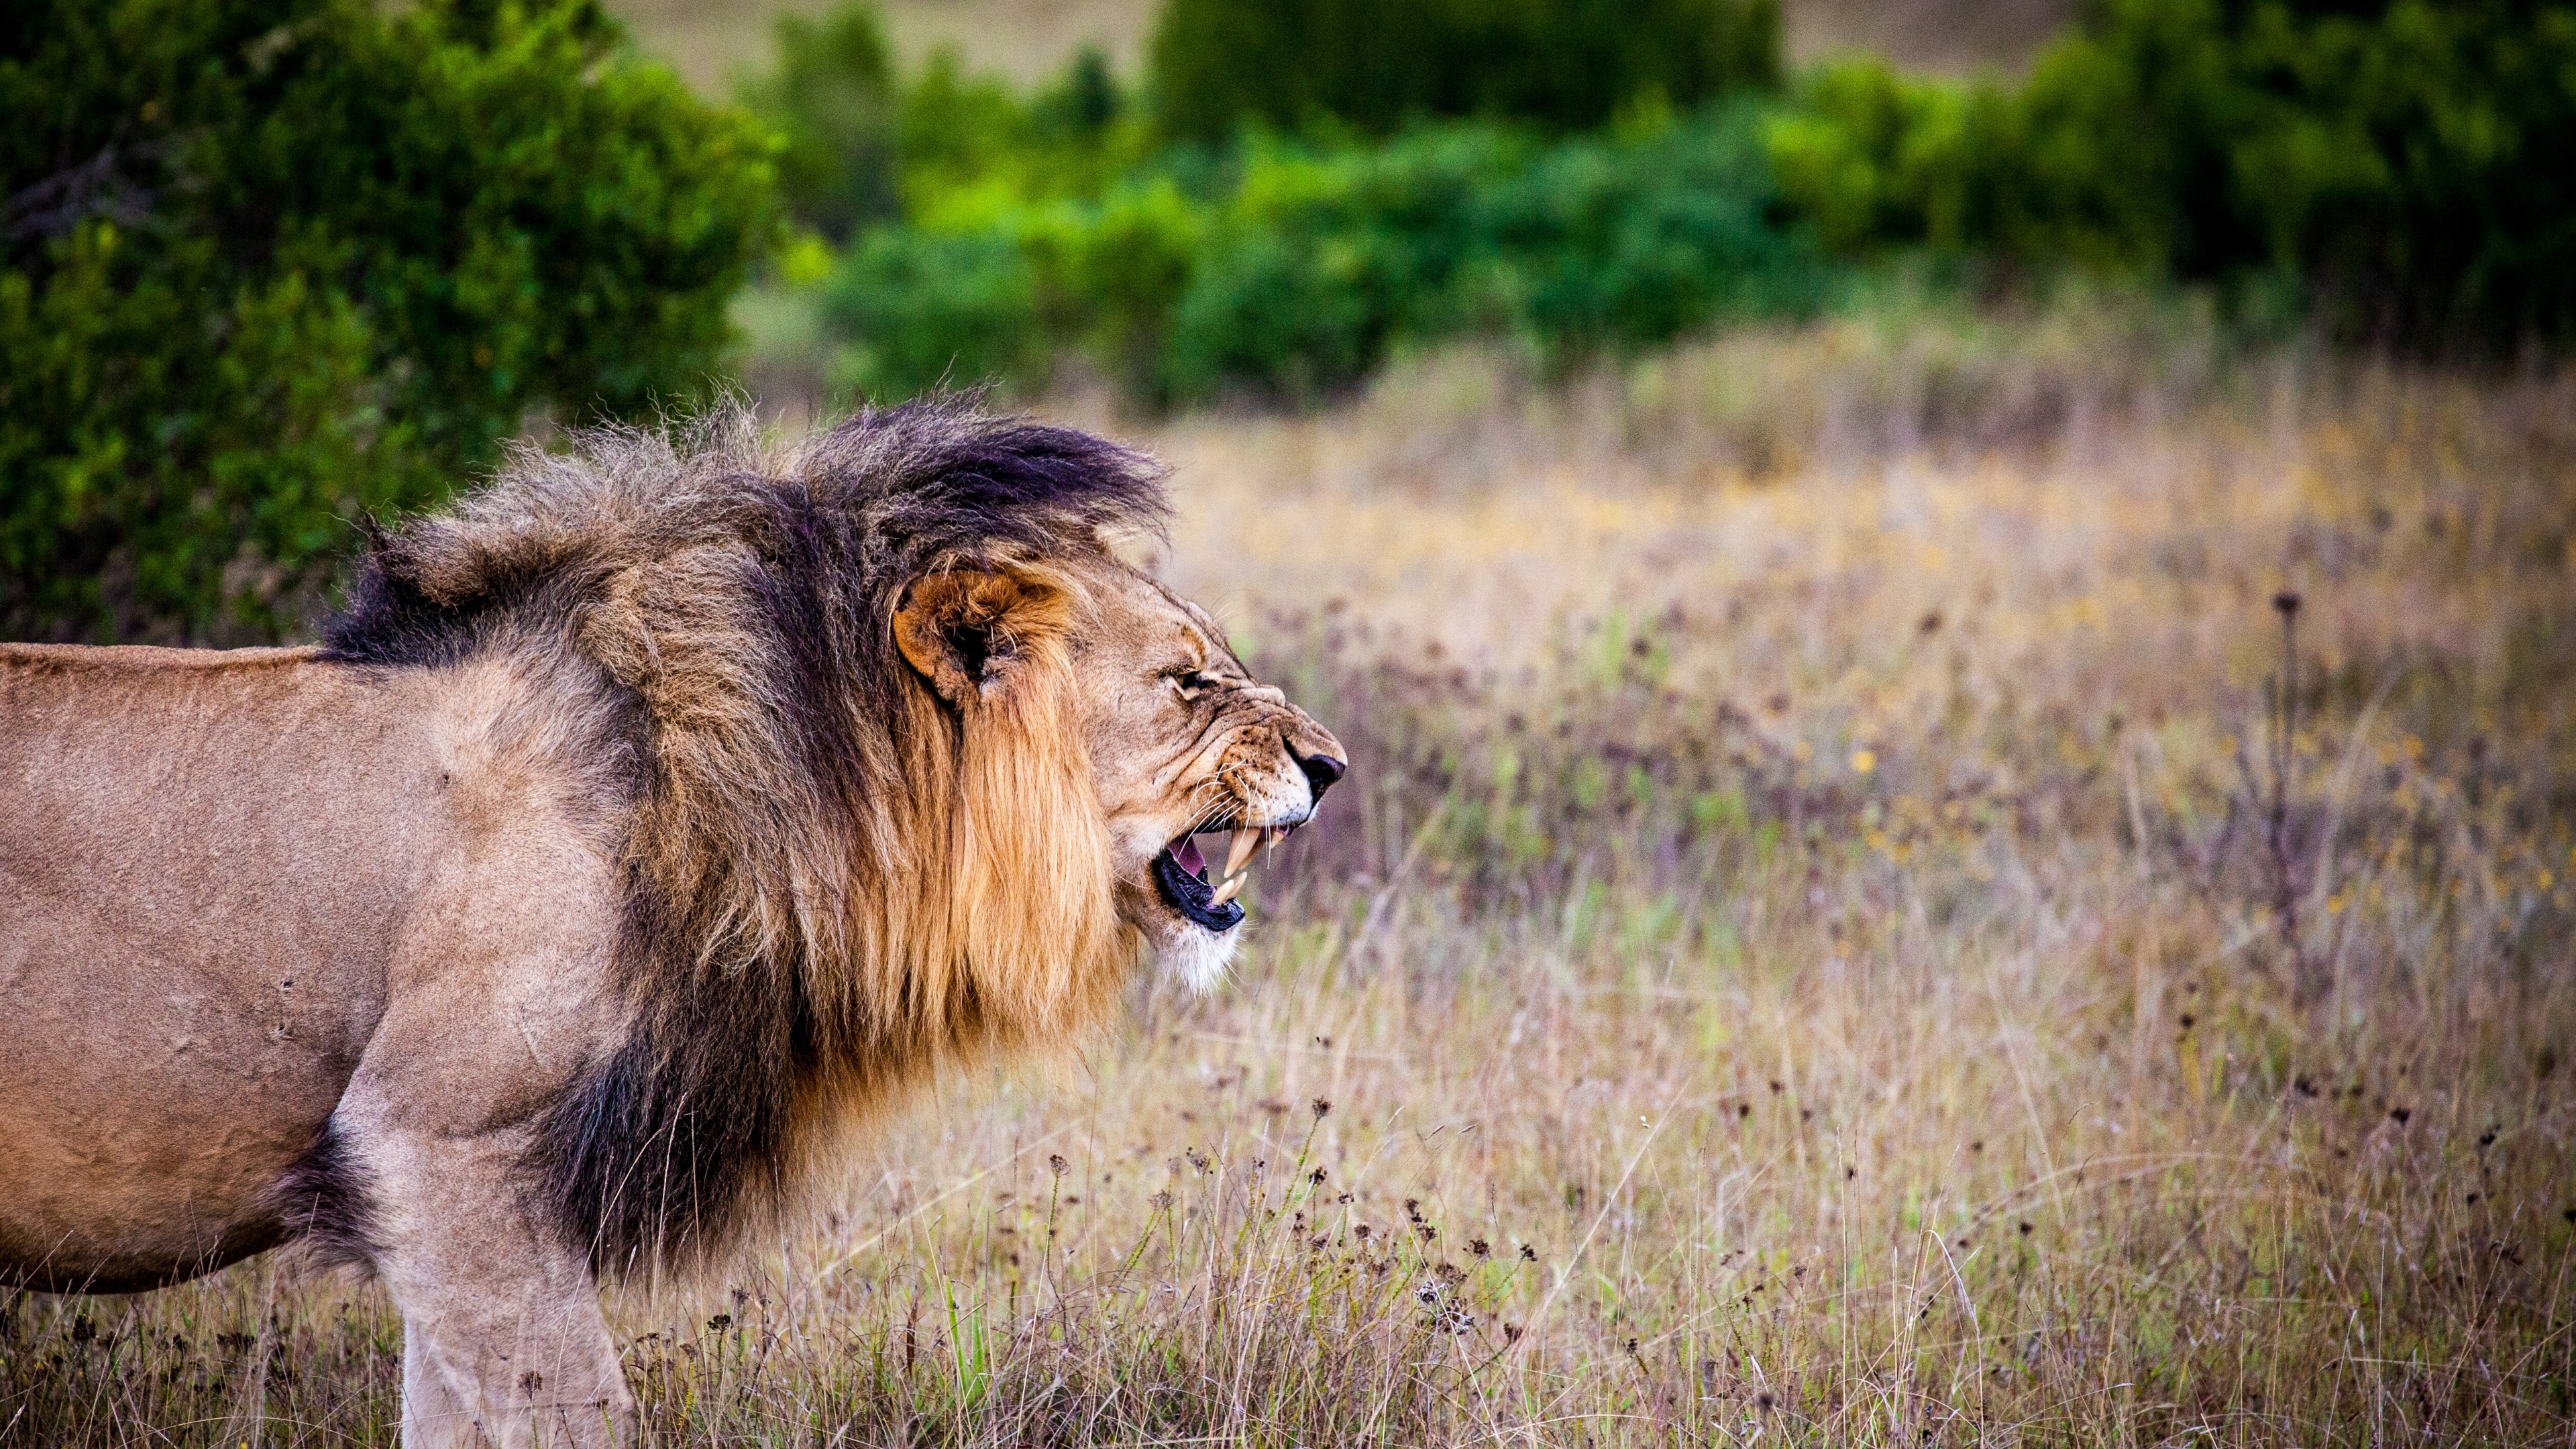 A lion standing in the grass with his mouth open - Lion